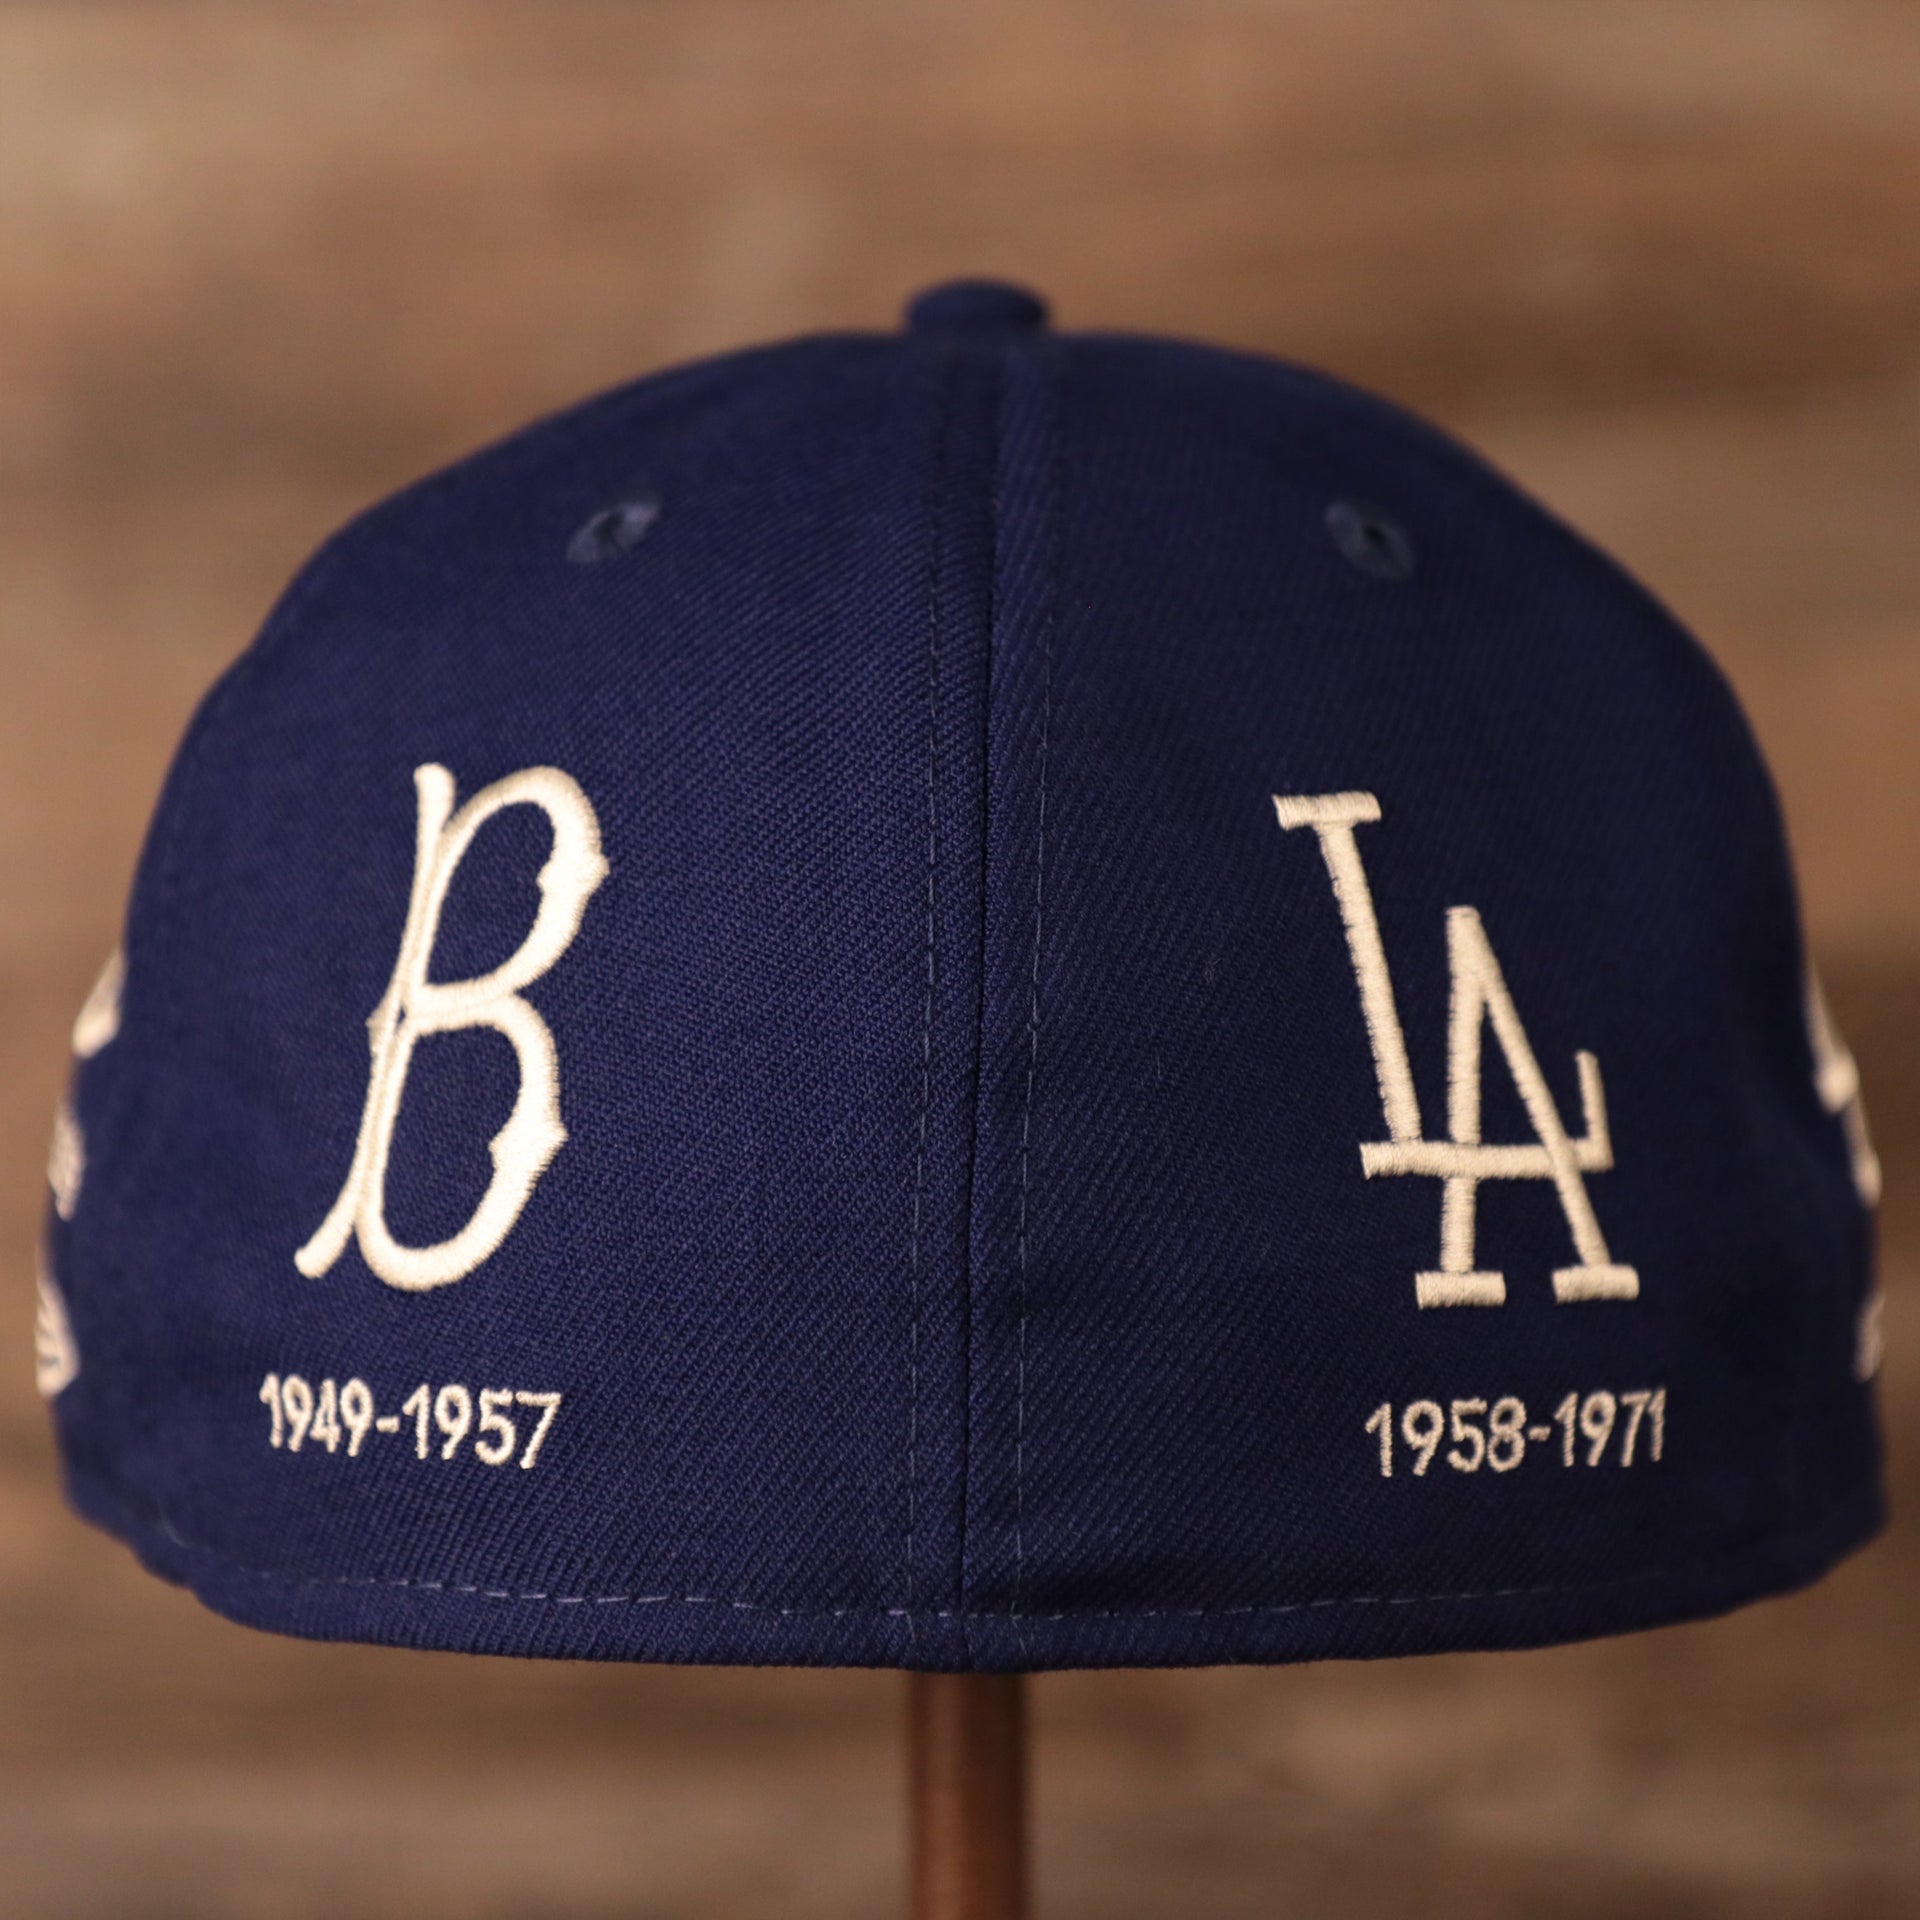 The vintage logos of the Los Angeles Dodgers on the back of the navy New Era 59fifty.